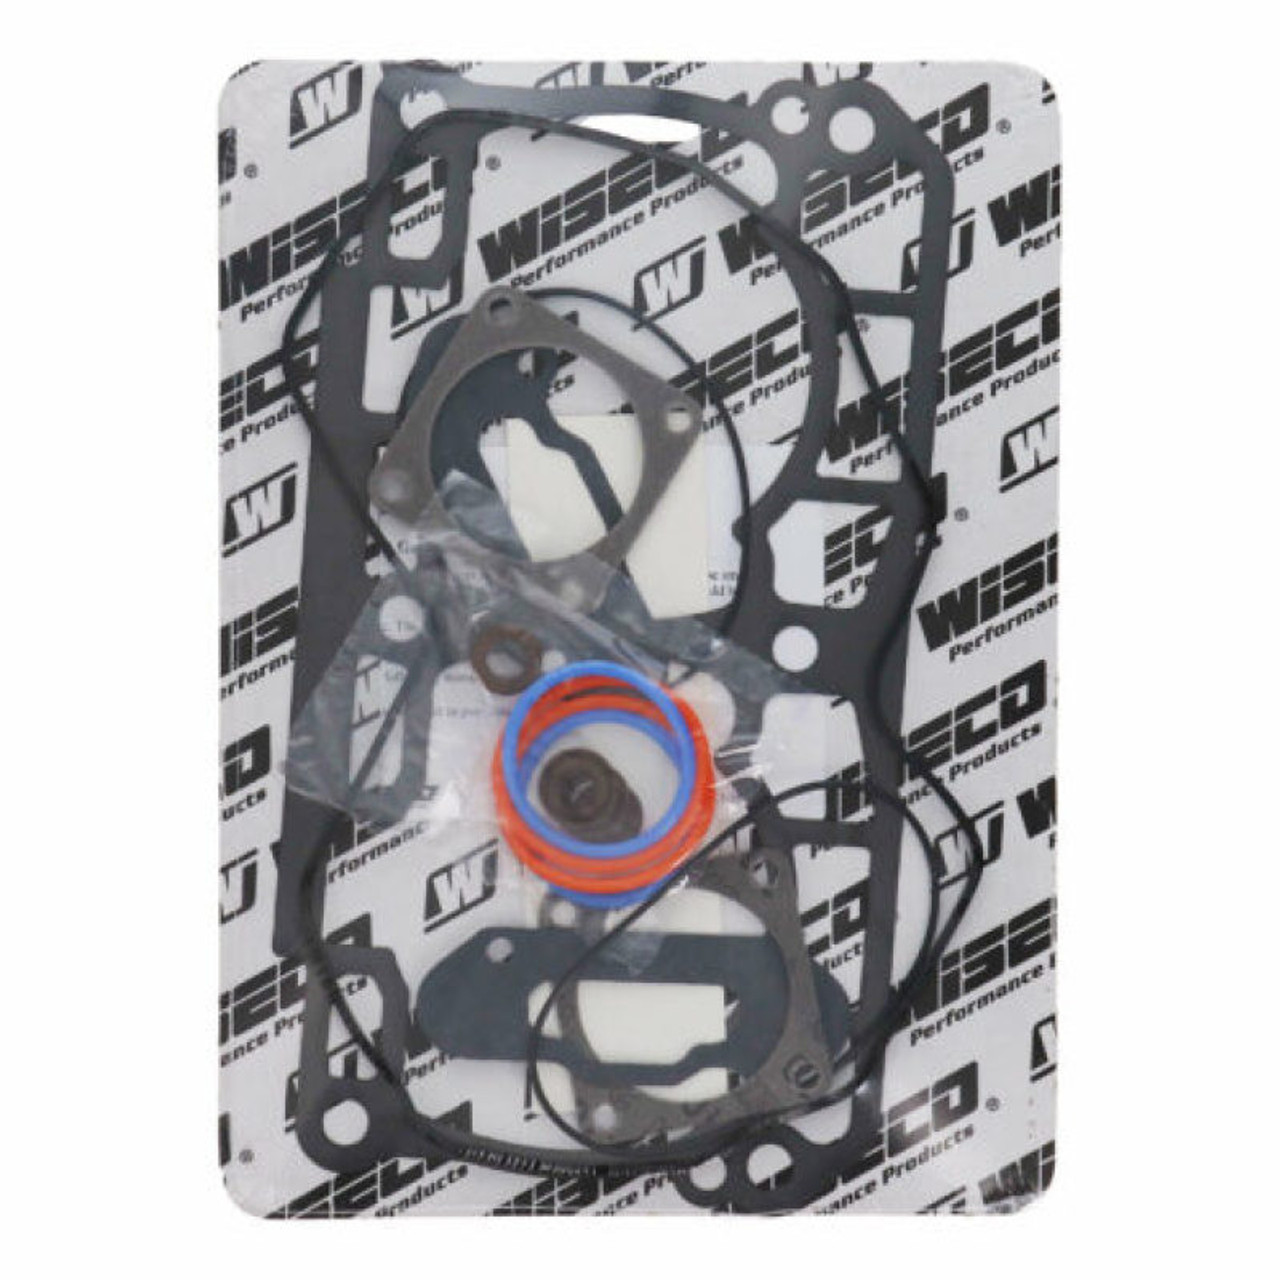 Wiseco 02-08 KTM 50 Air Cooled Top End Gasket Kit - W6256 Photo - Primary